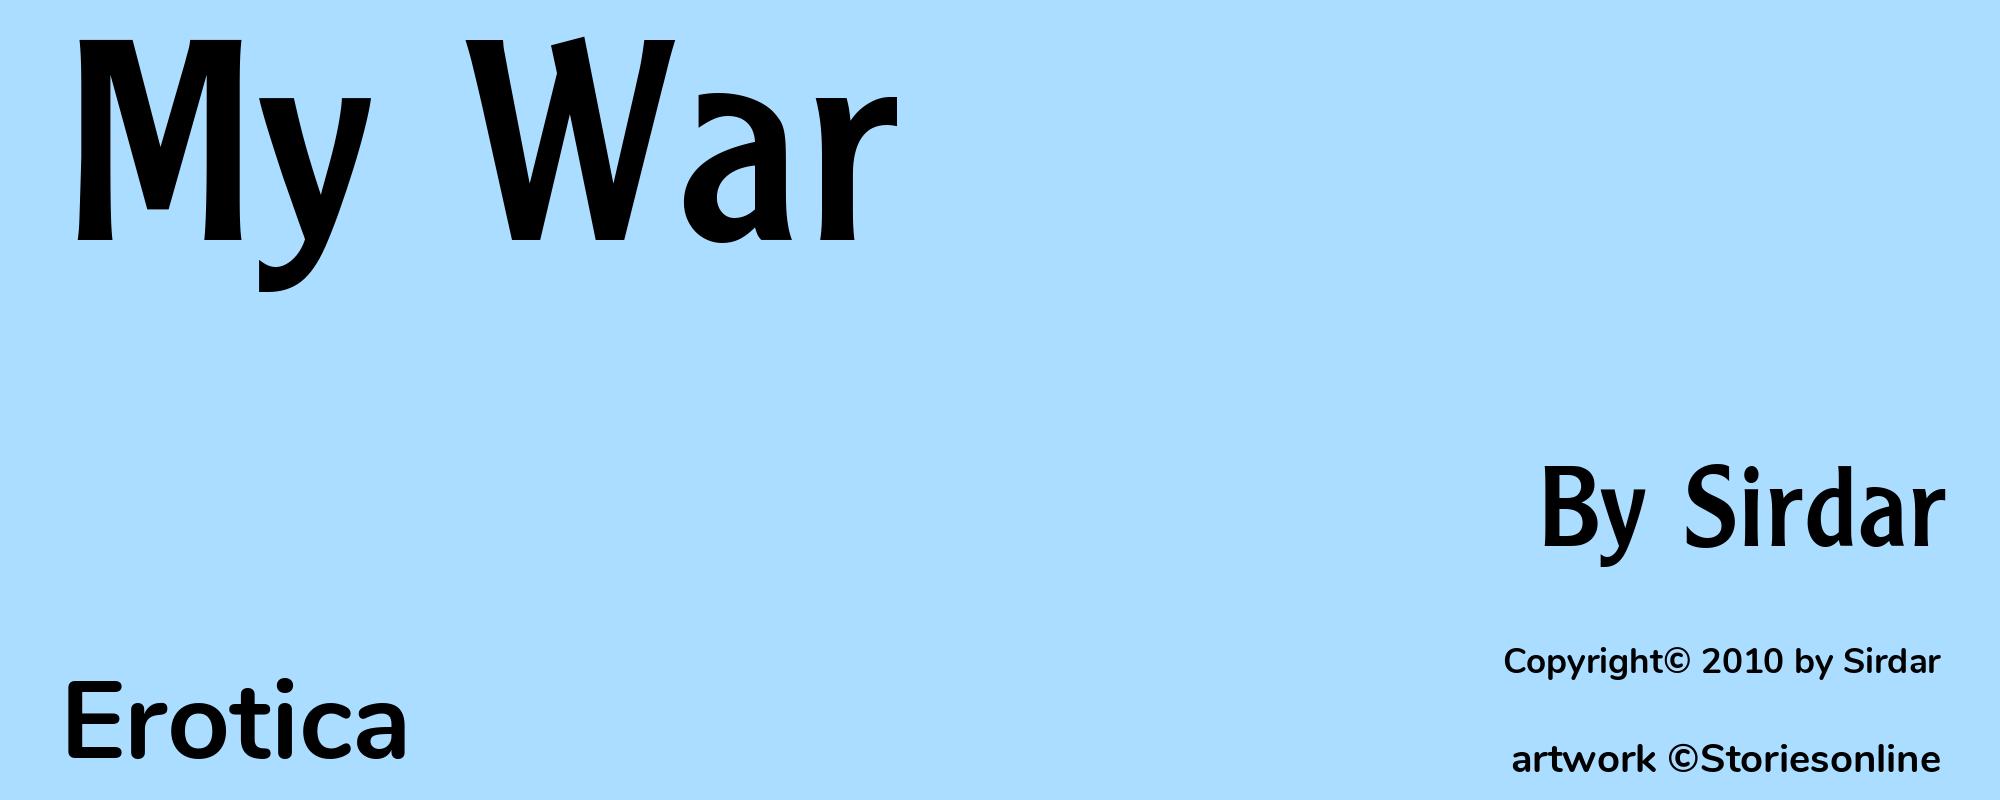 My War - Cover